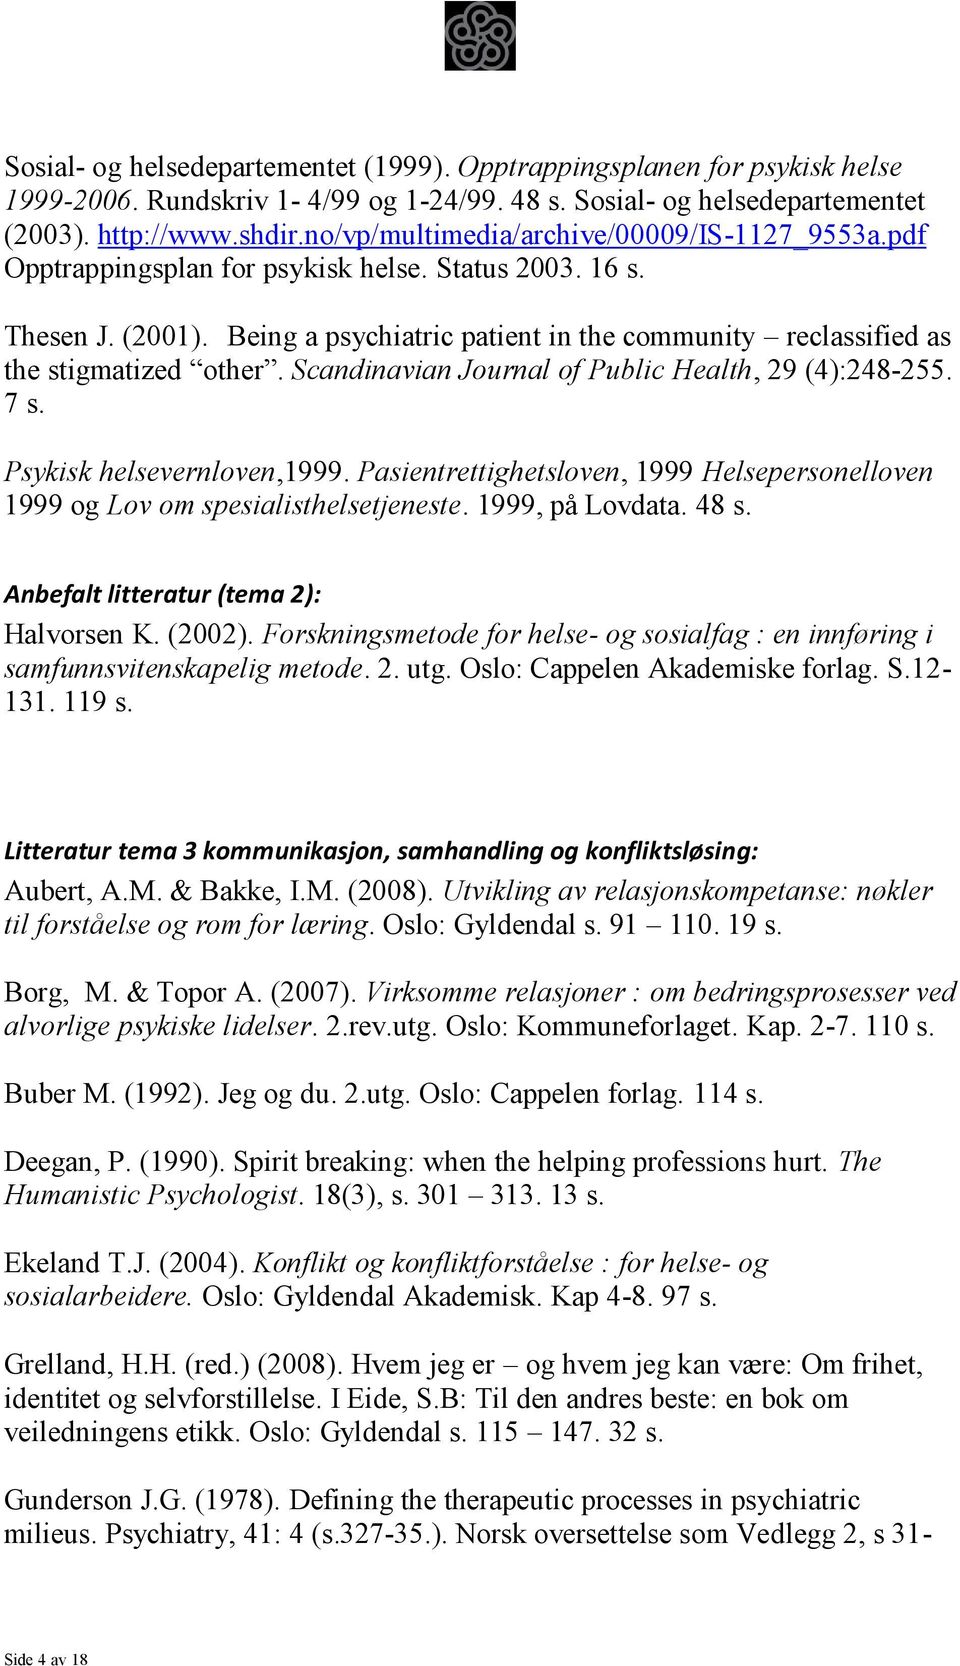 Being a psychiatric patient in the community reclassified as the stigmatized other. Scandinavian Journal of Public Health, 29 (4):248-255. 7 s. Psykisk helsevernloven,1999.